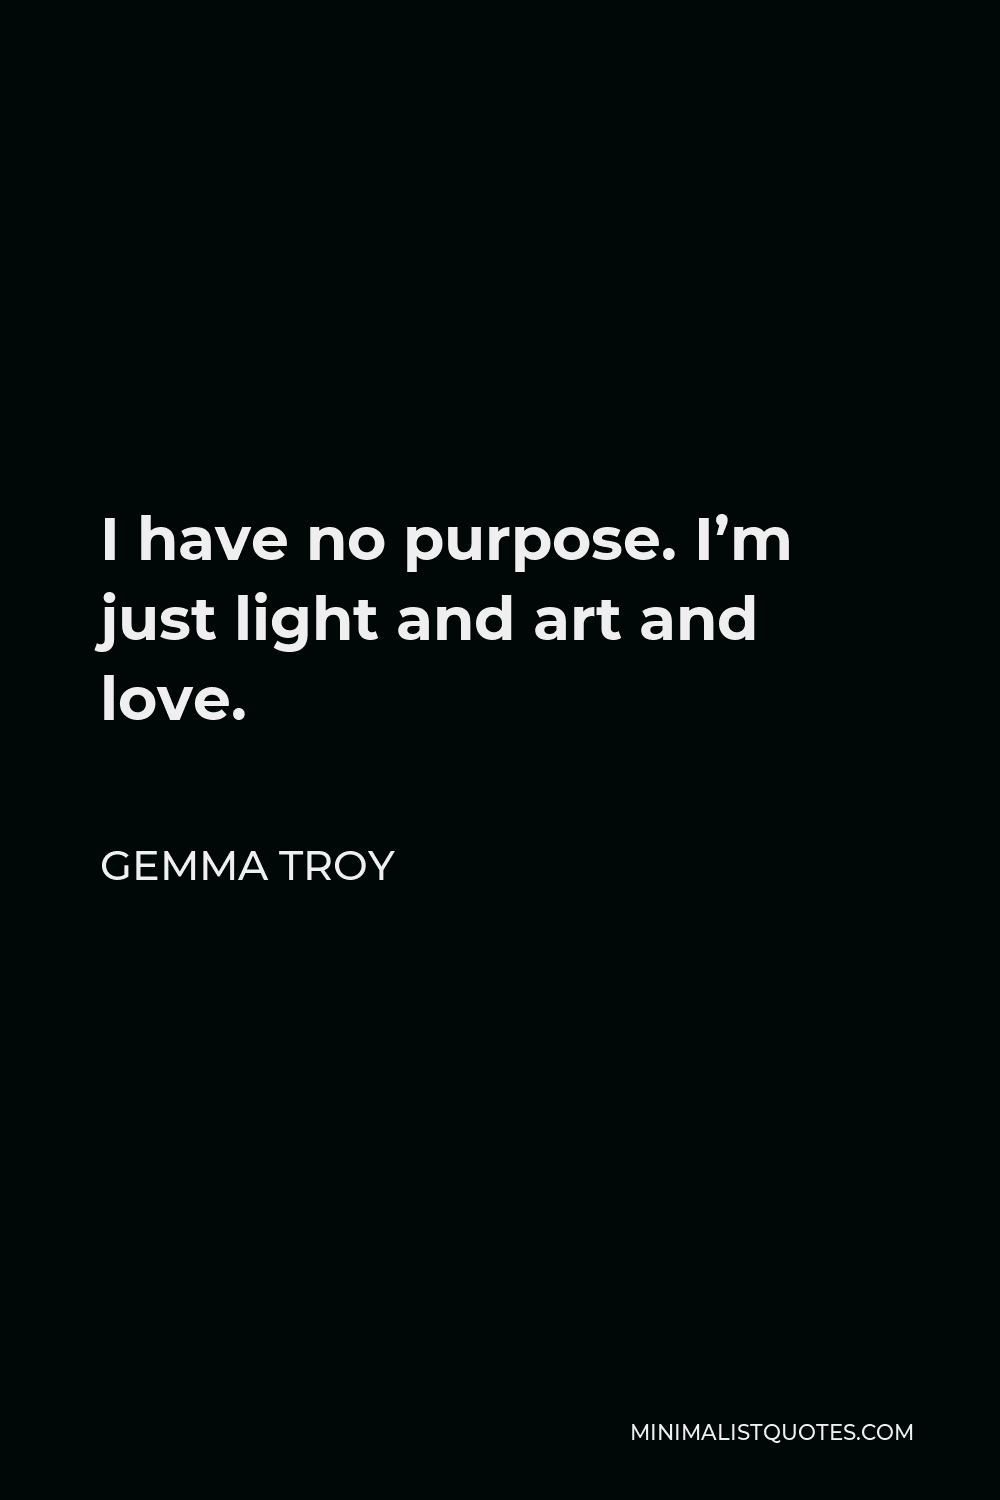 Gemma Troy Quote - I have no purpose. I’m just light and art and love.